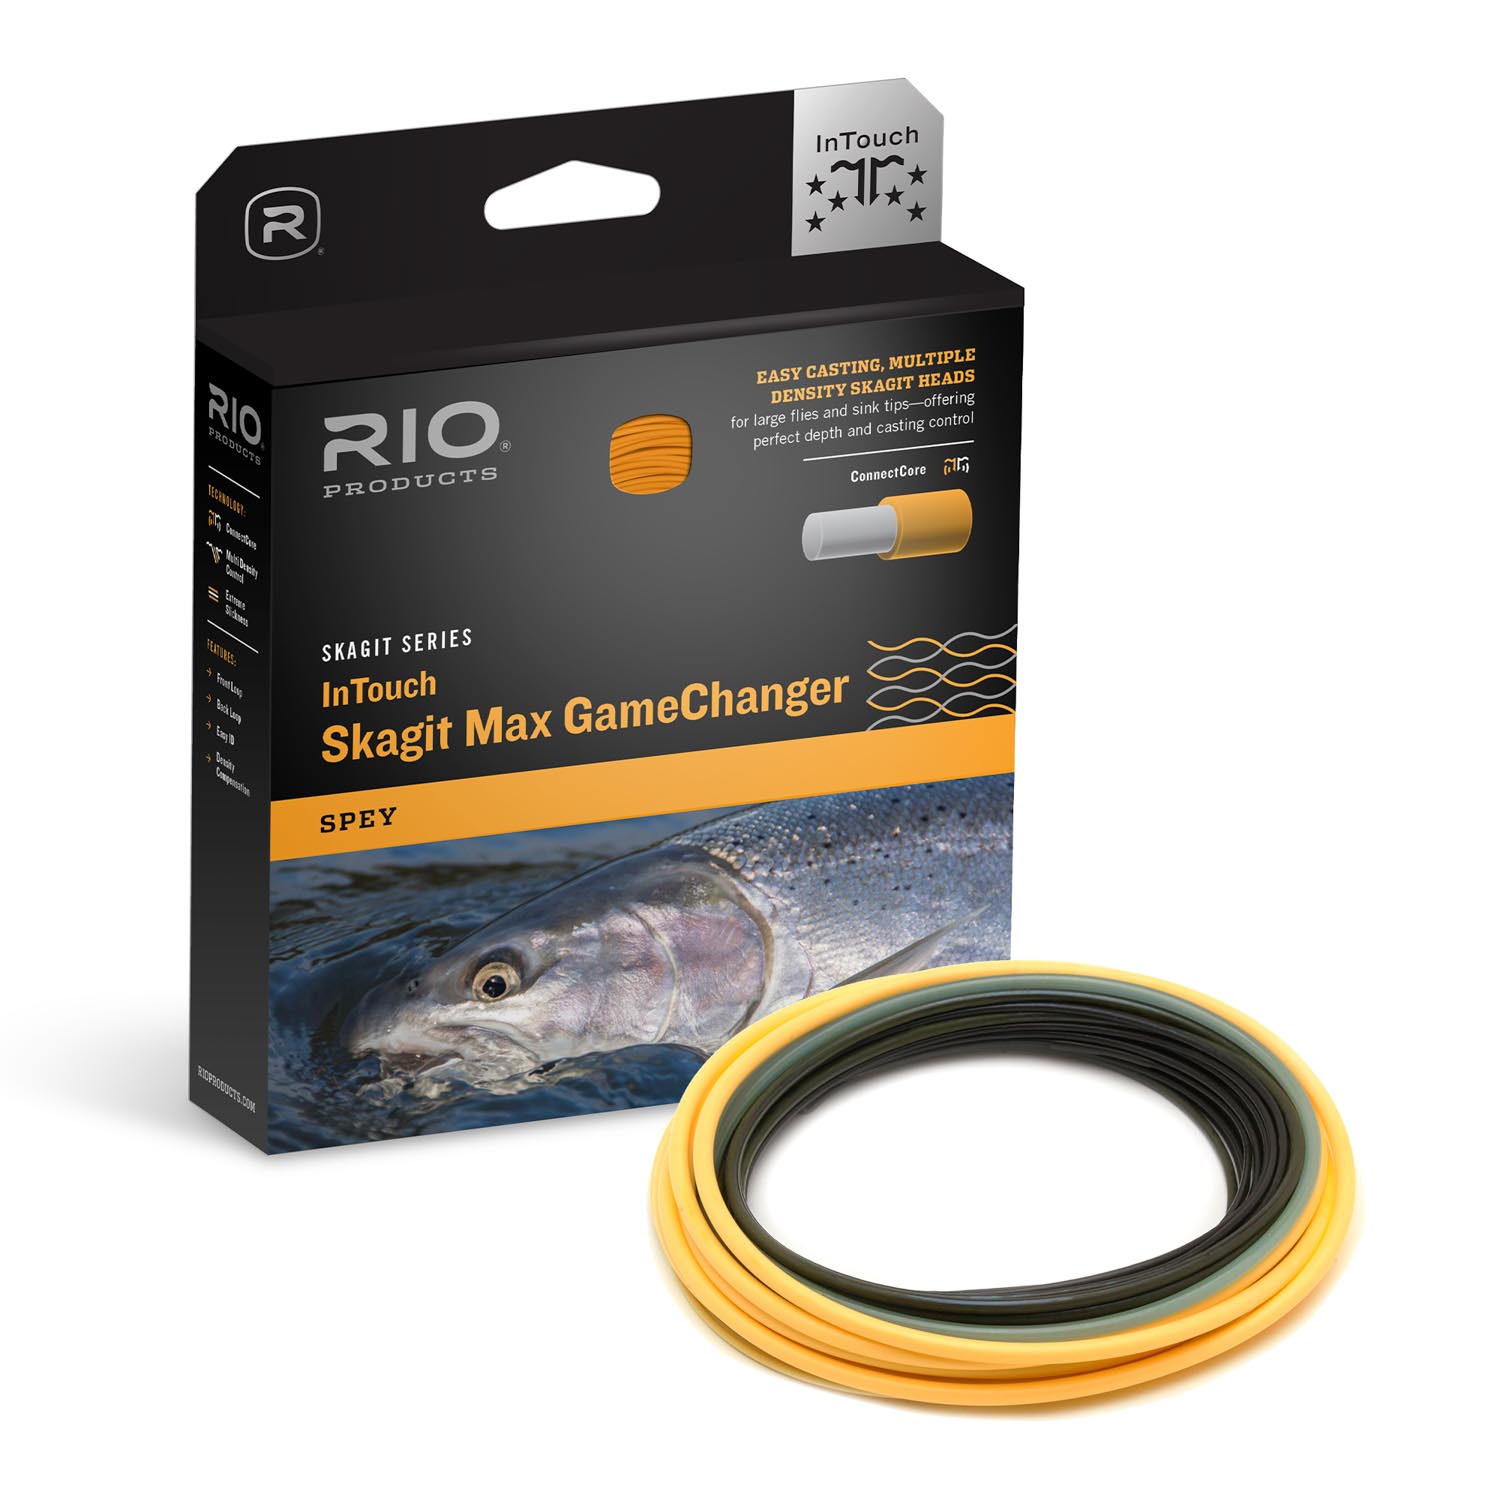 Rio Type 3 Sink Tip Fly Line